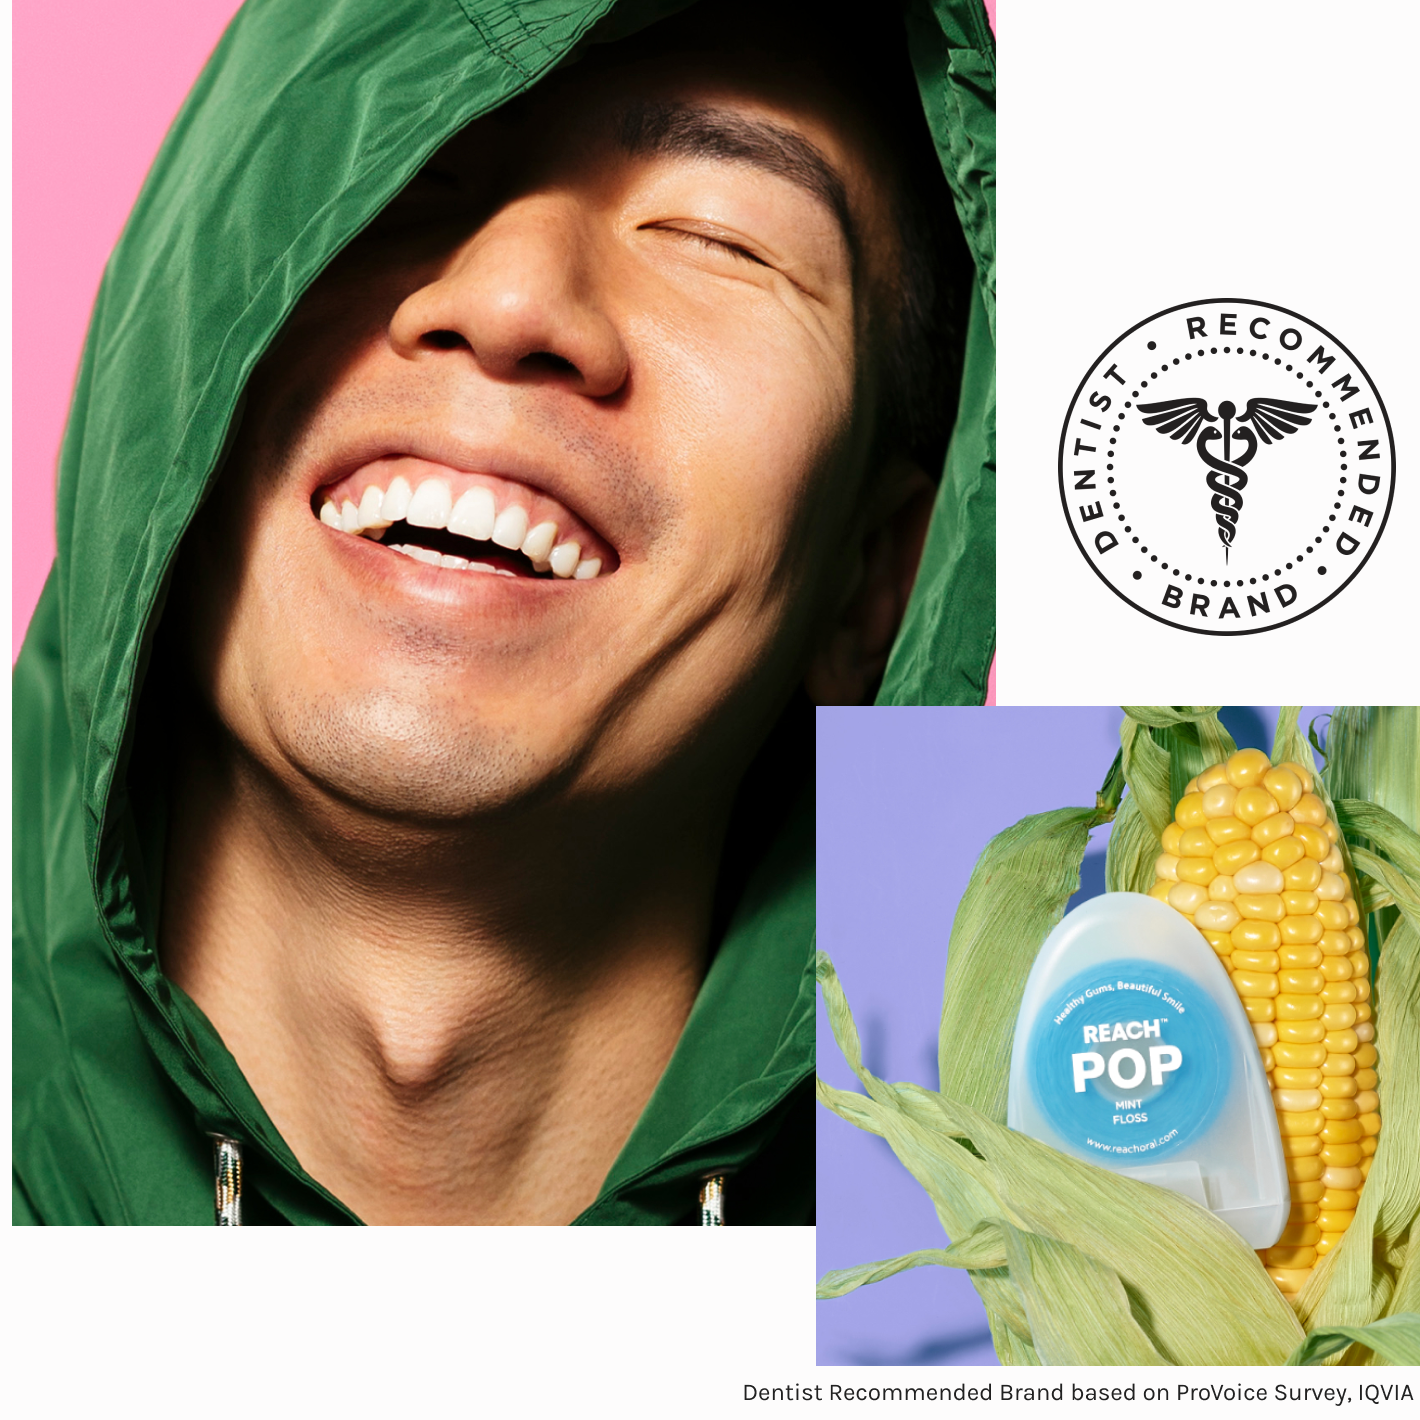 A male model wearing a hoodie, smiling with his eyes closed, and his teeth perfectly white and cleanm, overlayed with an image of corn and a box of Reach POP Mint Floss, with a stamp "Dentist Recommended Brand" over it.